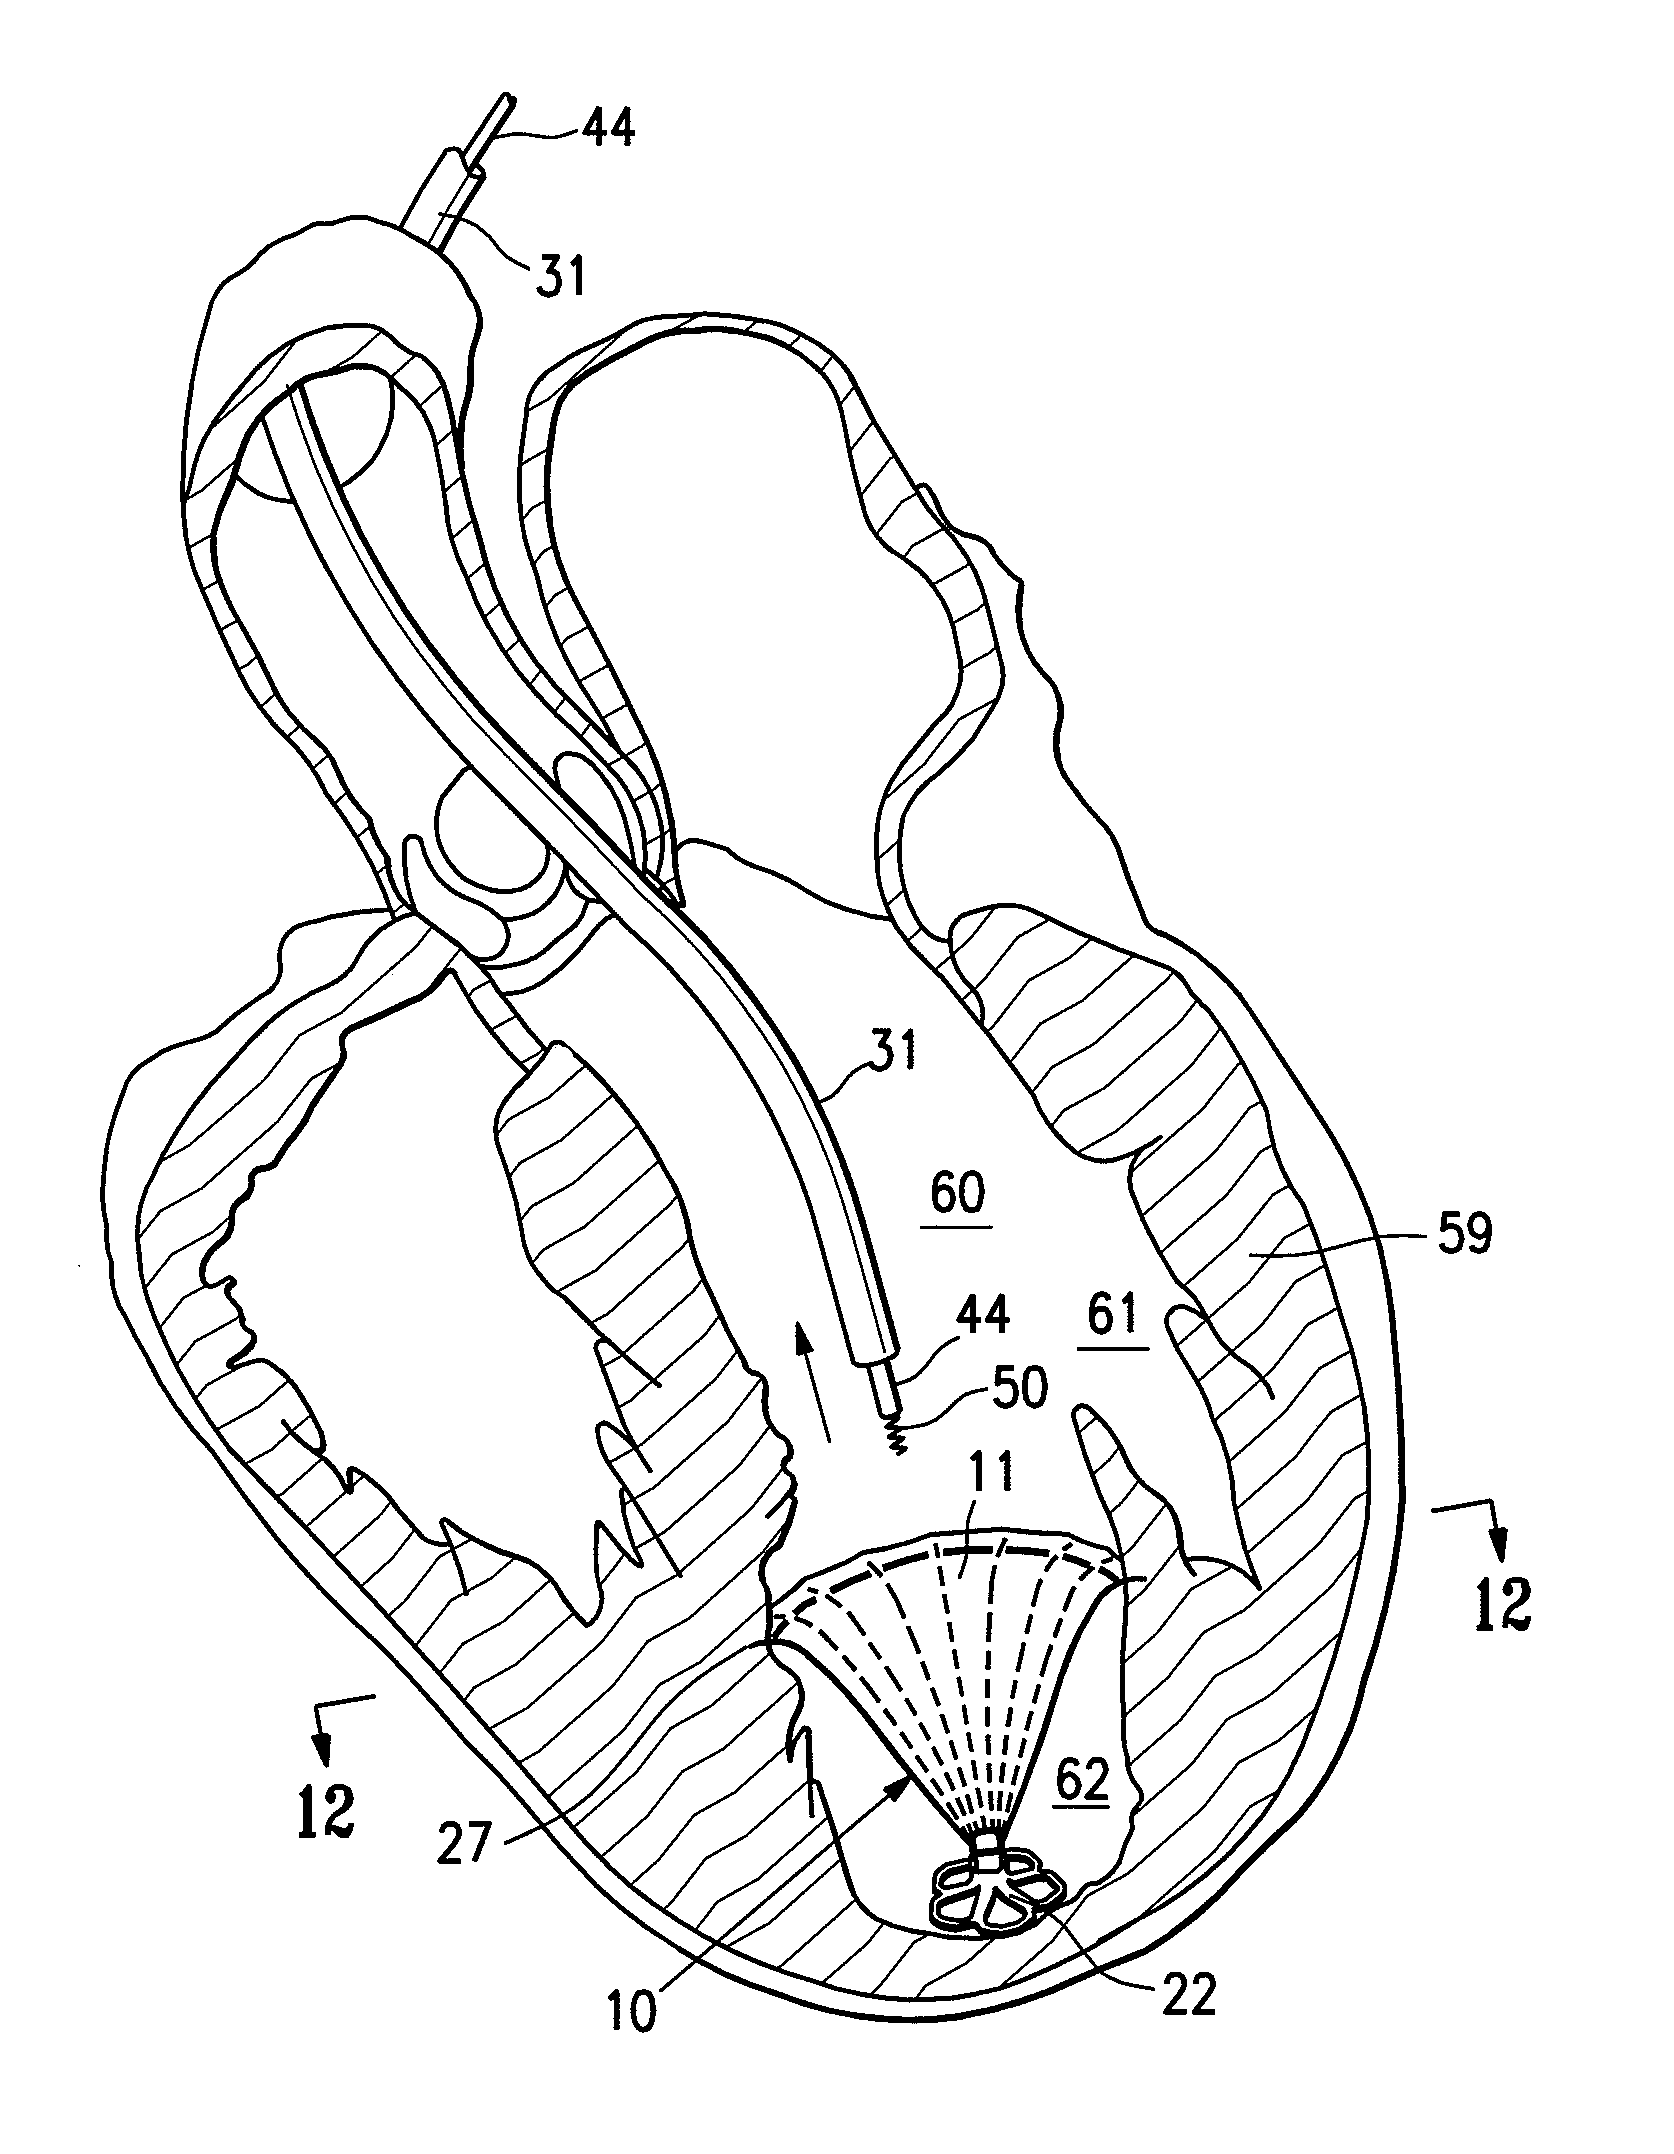 Peripheral seal for a ventricular partitioning device